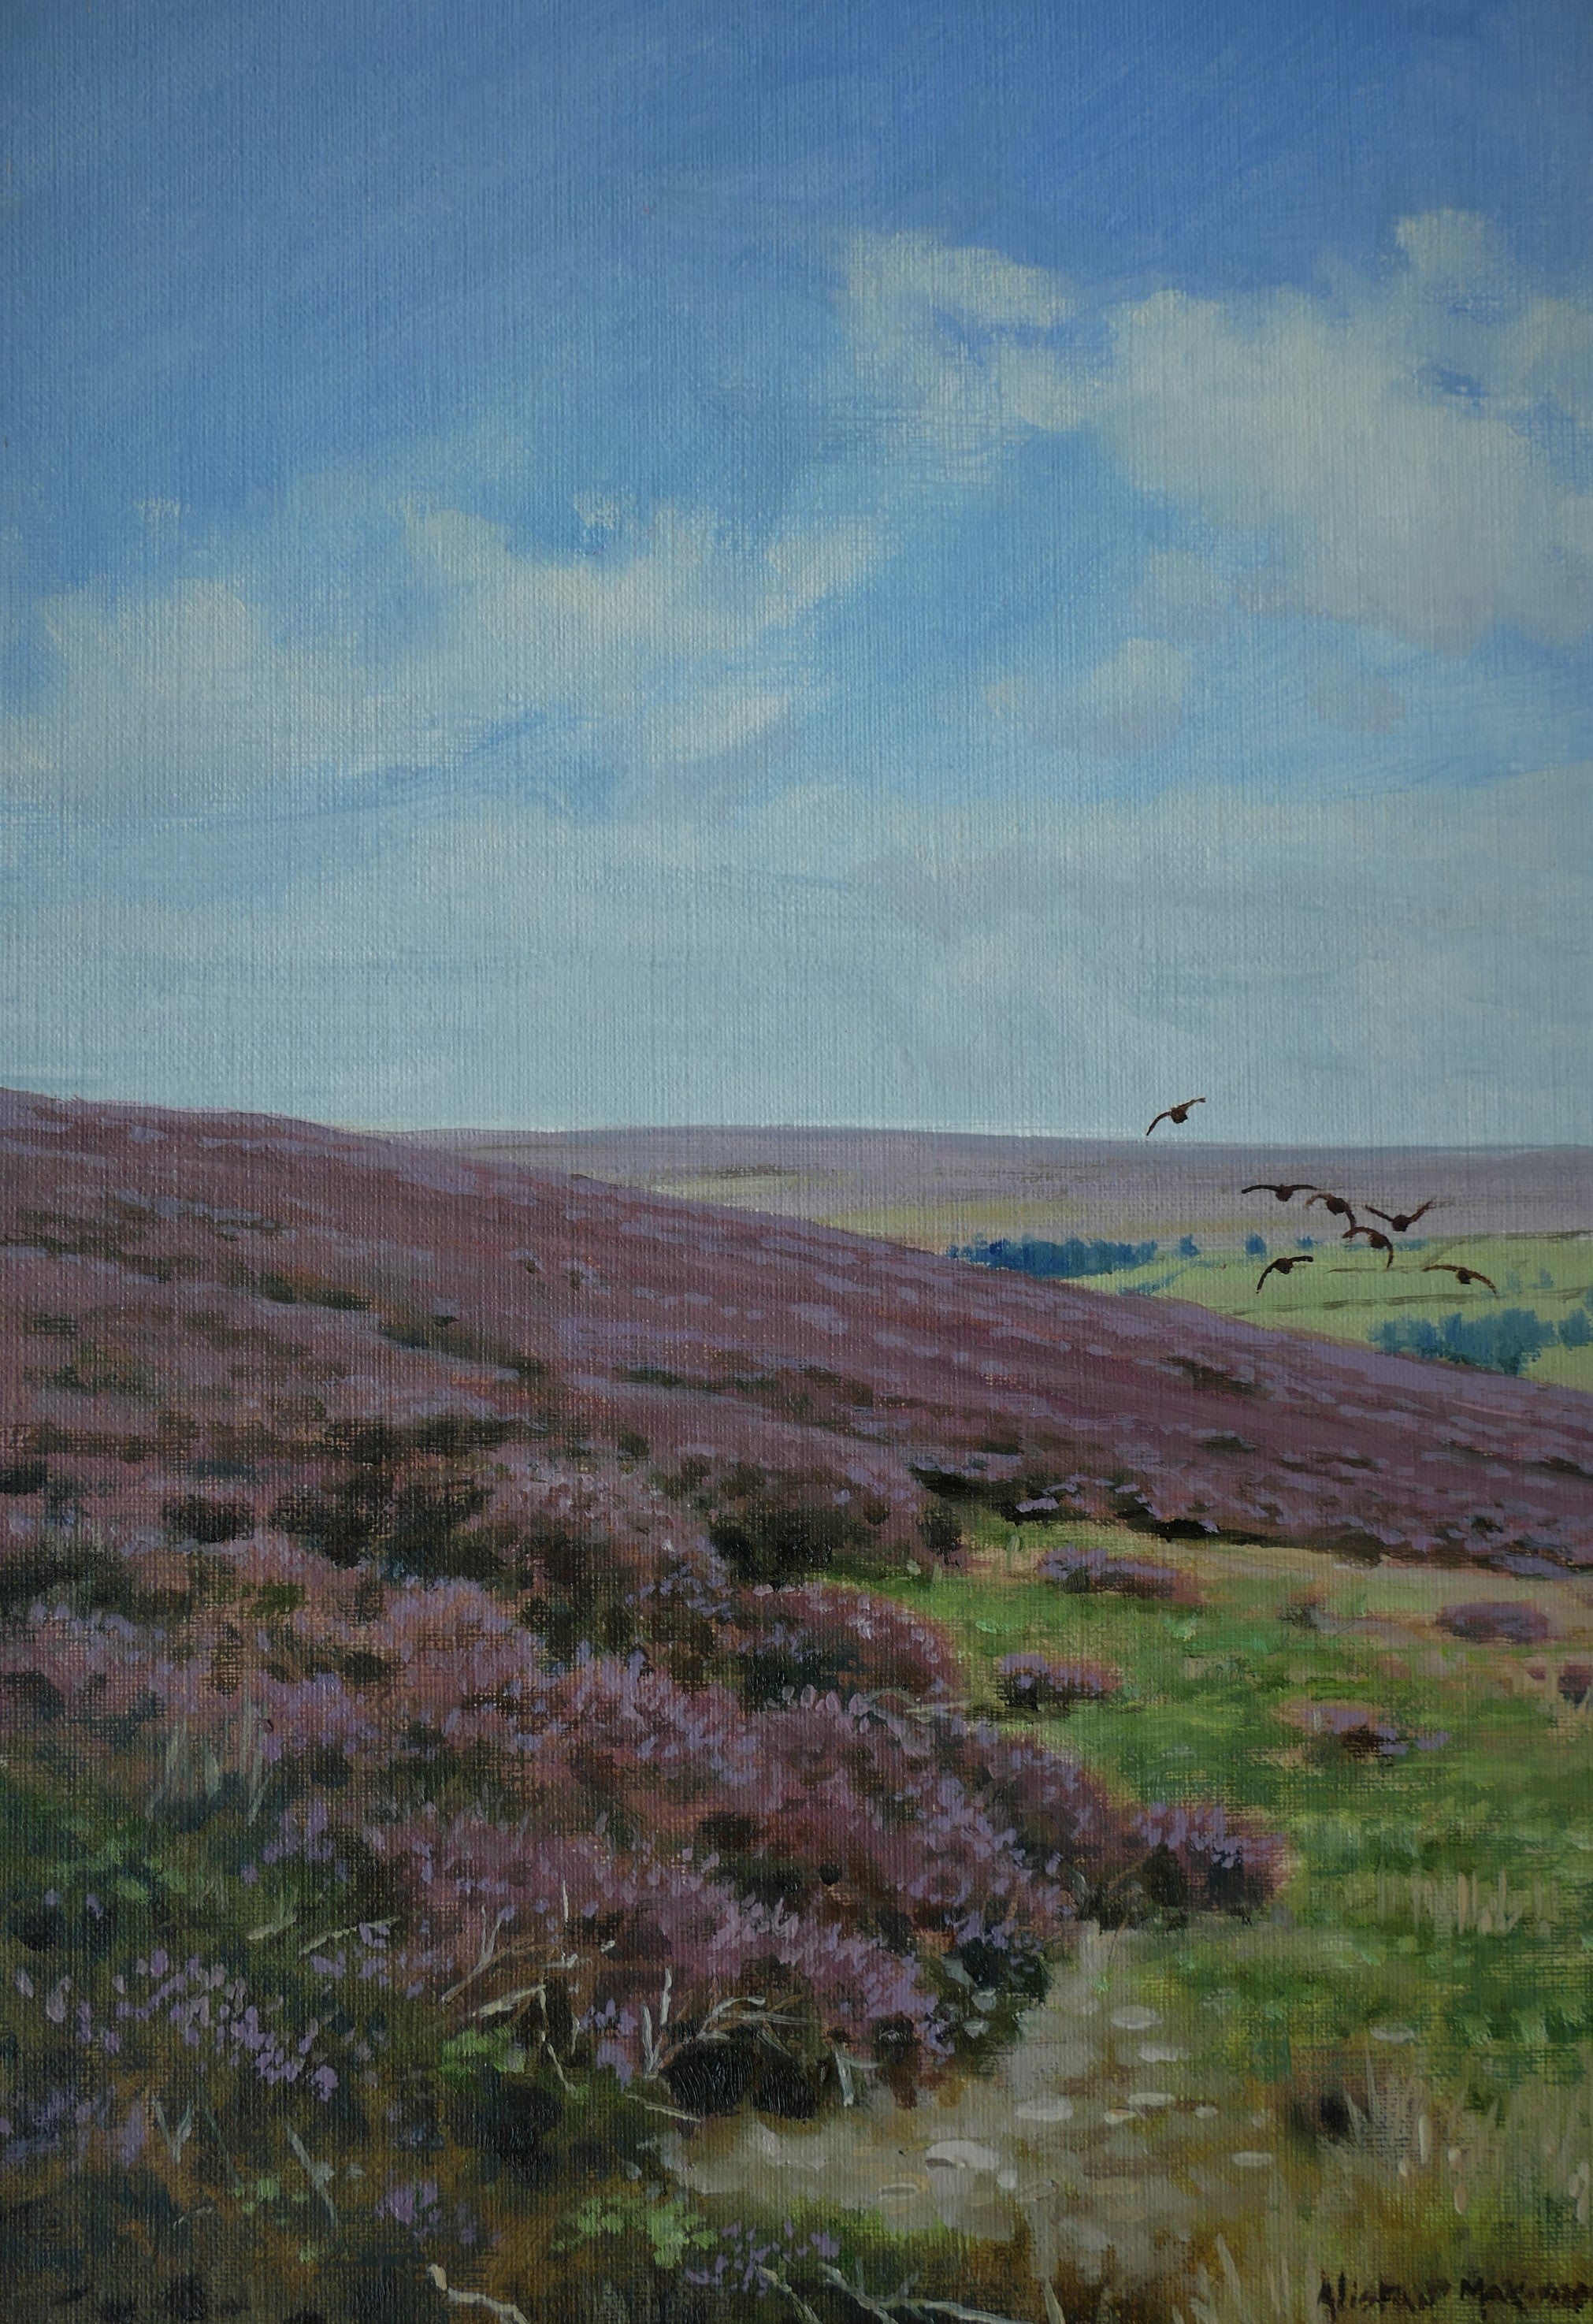 'Bransdale Grouse' - Original Oil Painting by Alistair Makinson - 20 x 30cm